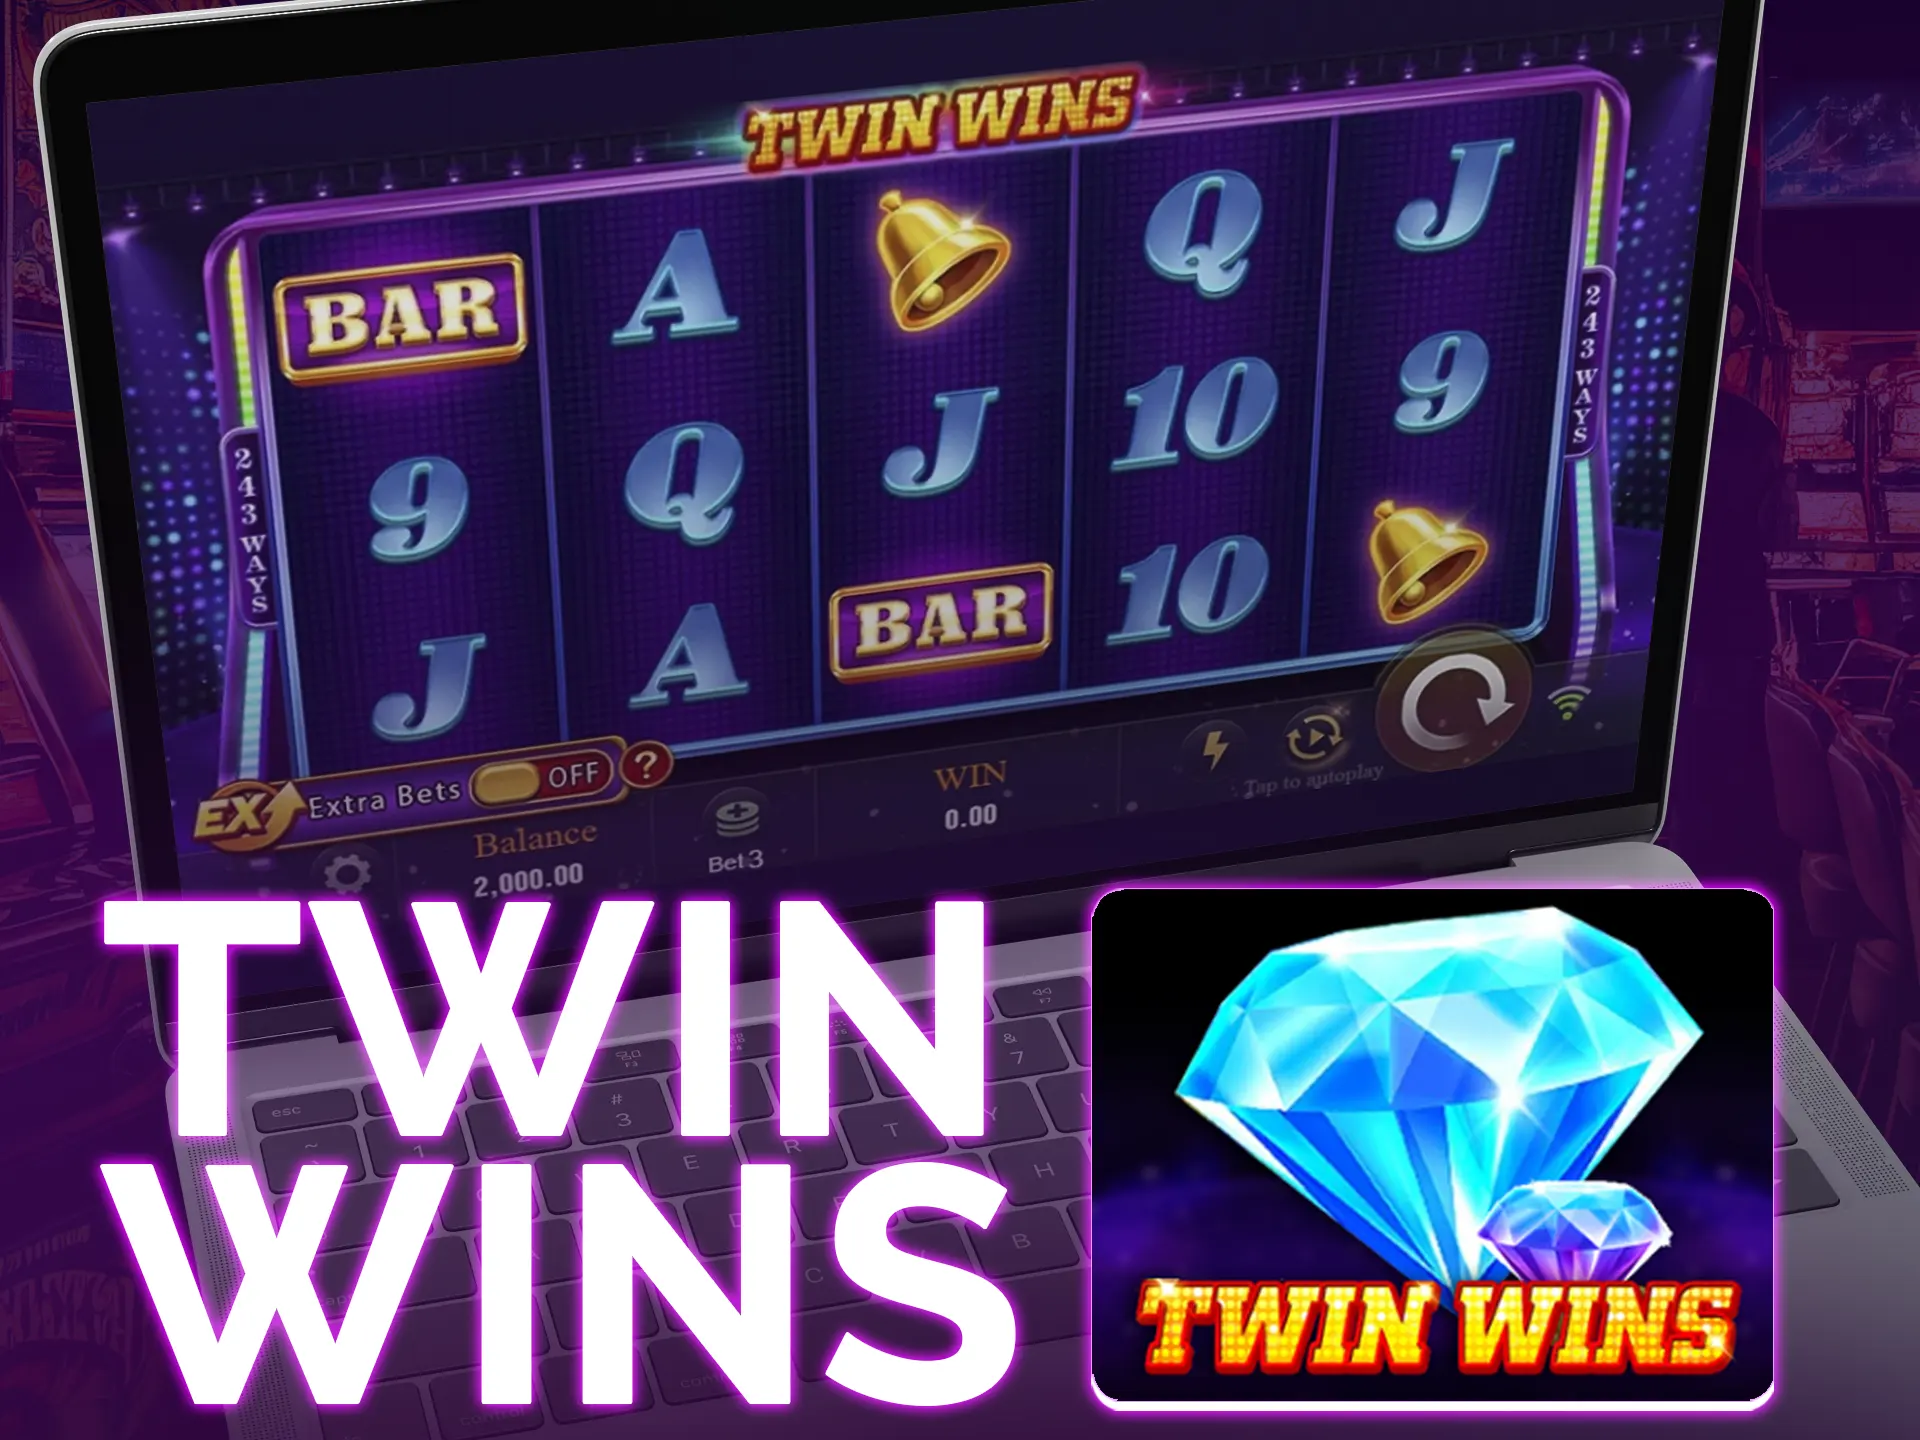 Twin wins it`s a slot with 5x3 layout, 243 ways to win, x1000 max winnings, 97% RTP.